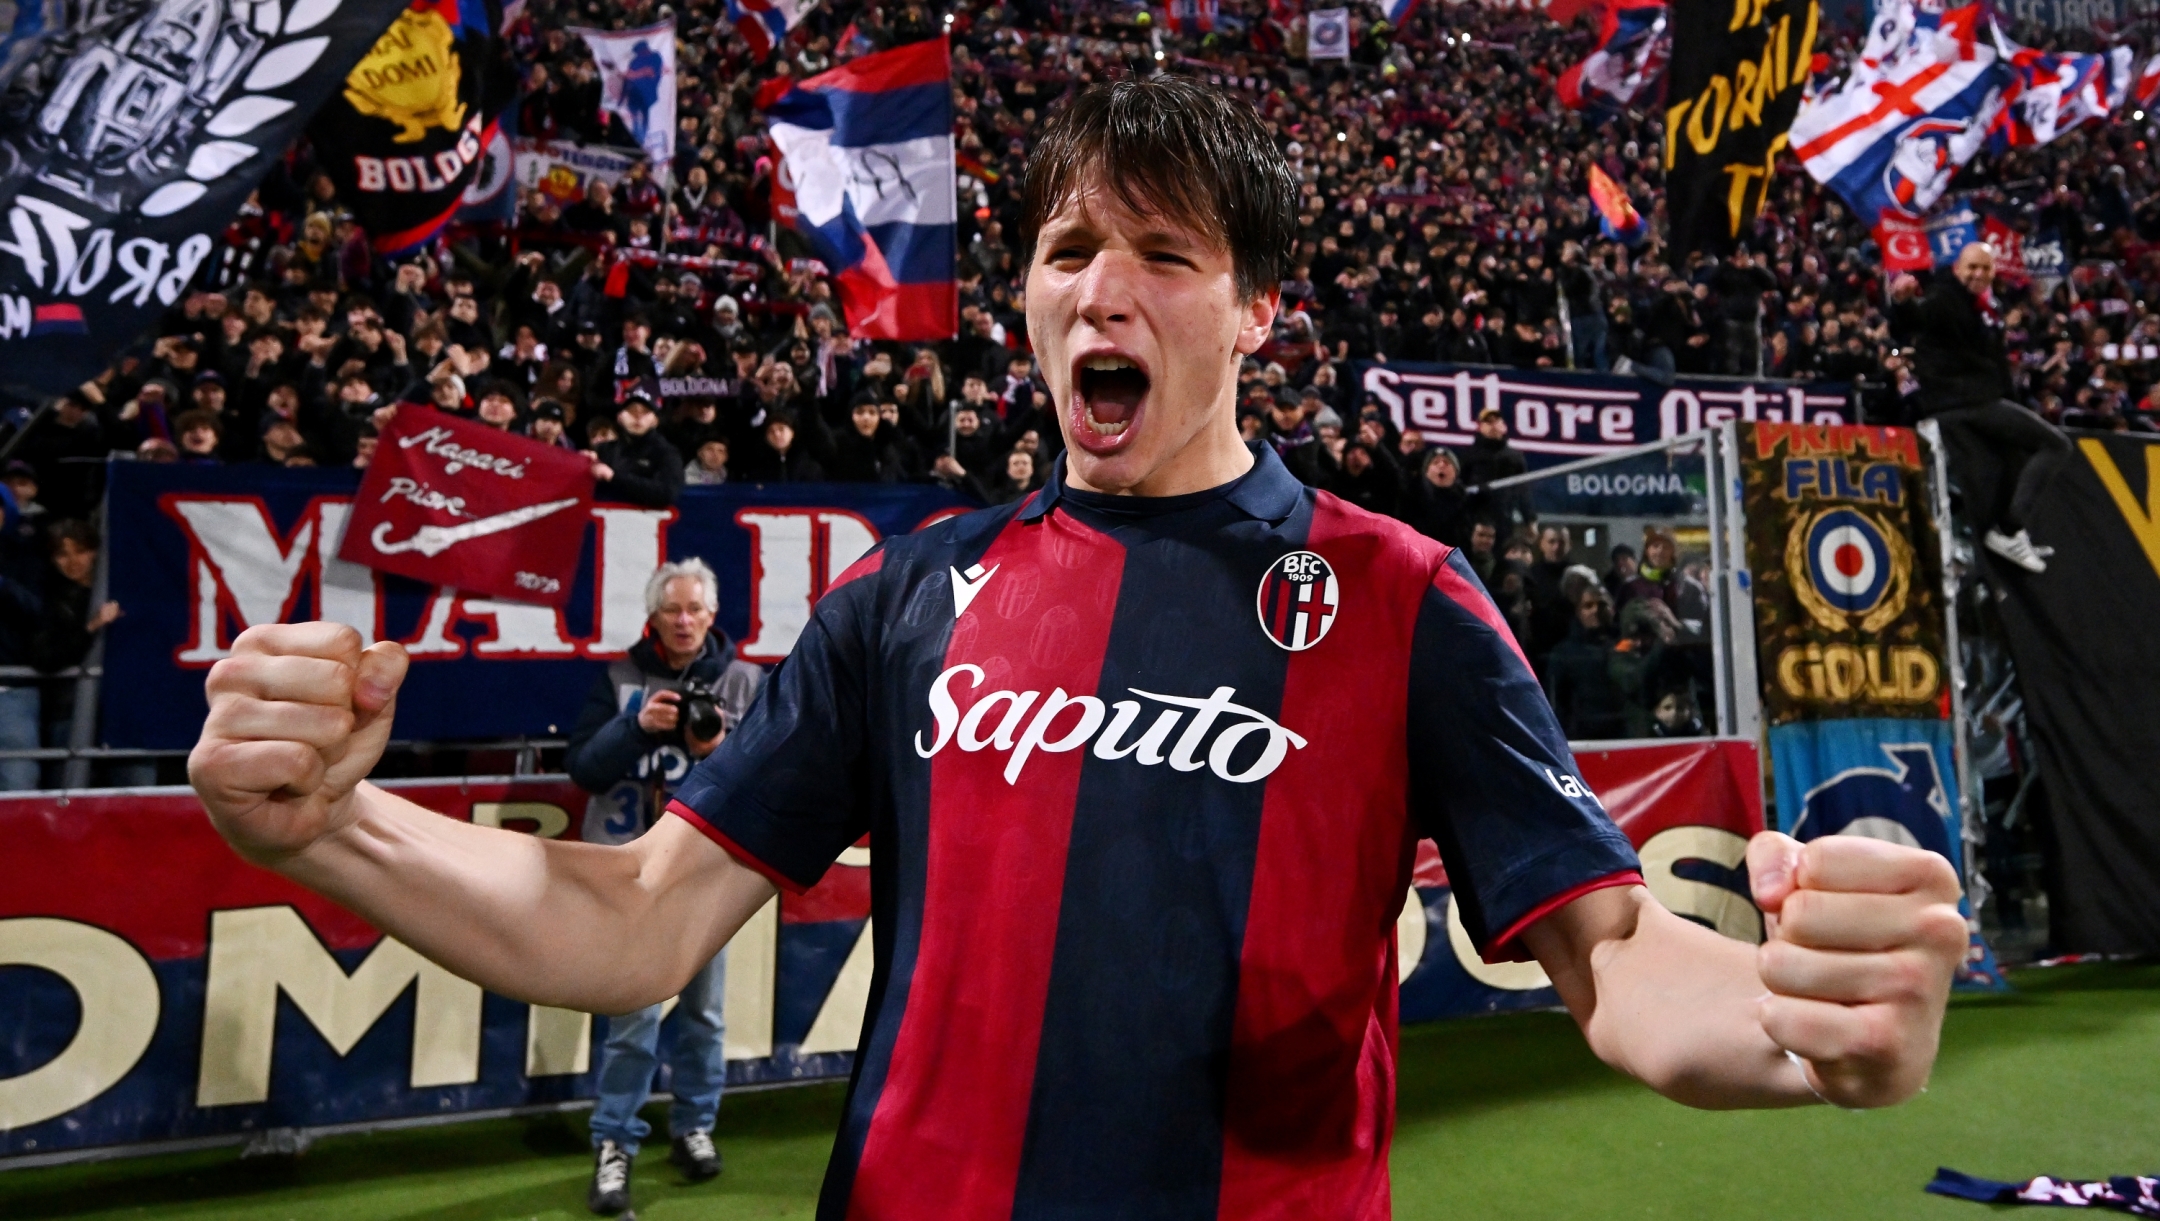 BOLOGNA, ITALY - FEBRUARY 23: Giovanni Fabbian of Bologna FC celebrates following the team's victory in the Serie A TIM match between Bologna FC and Hellas Verona FC at Stadio Renato Dall'Ara on February 23, 2024 in Bologna, Italy. (Photo by Alessandro Sabattini/Getty Images)